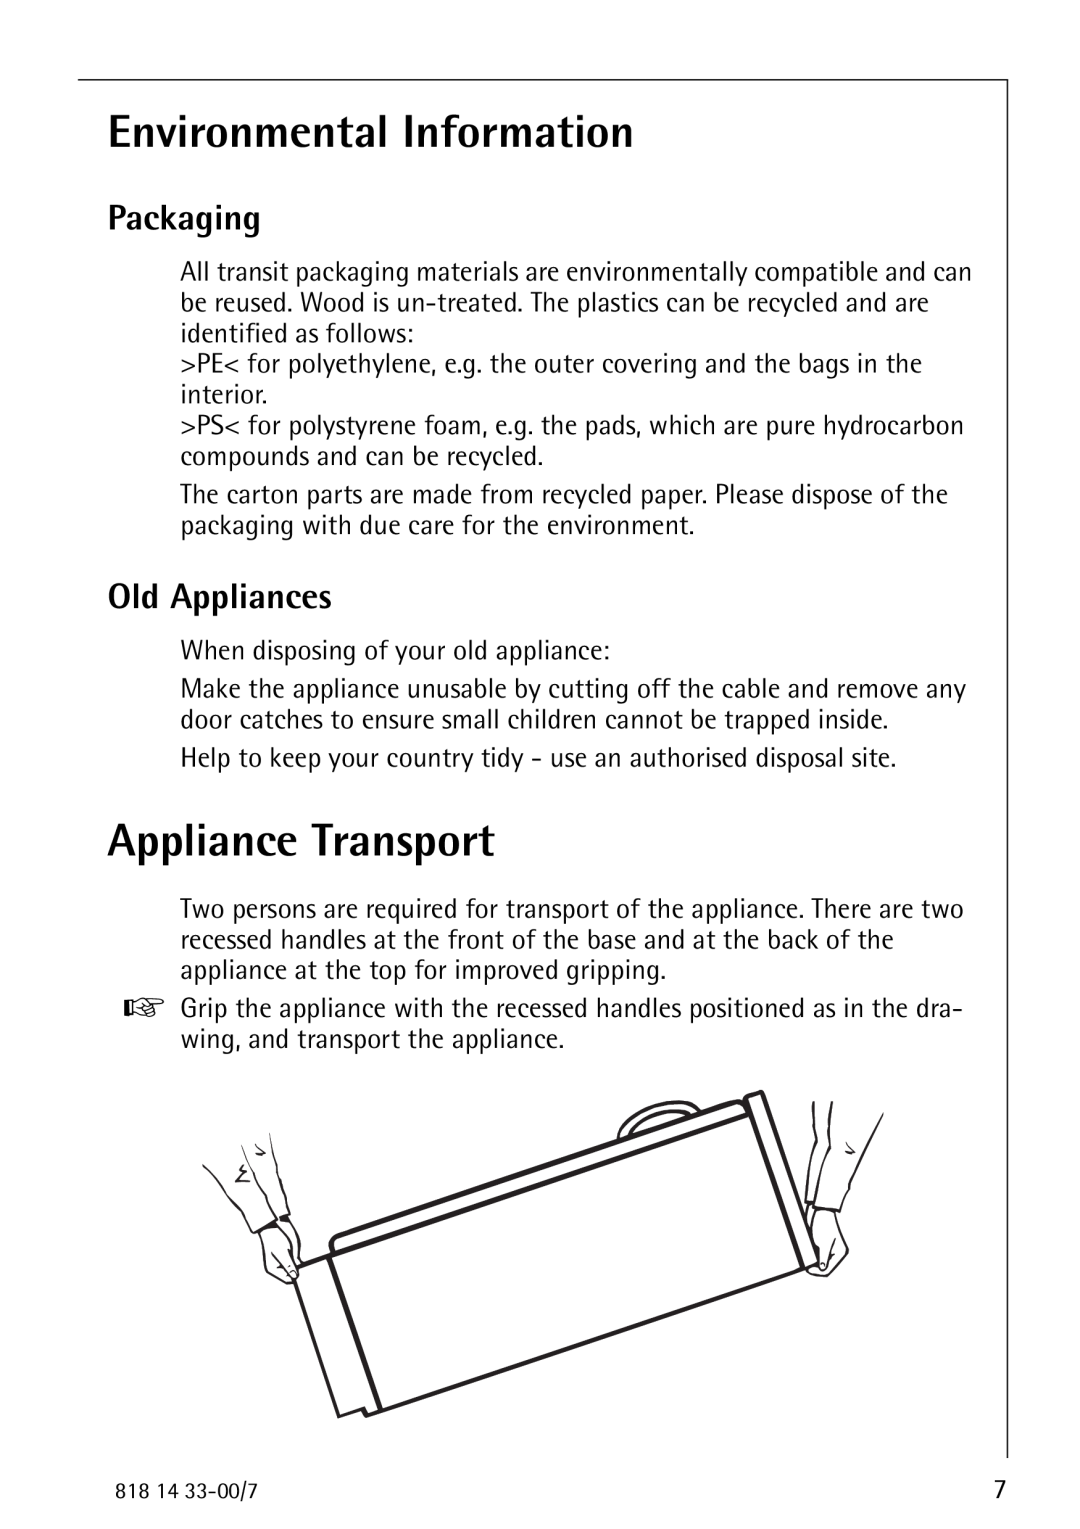 Electrolux 2170-4 operating instructions Environmental Information, Appliance Transport, Packaging, Old Appliances 